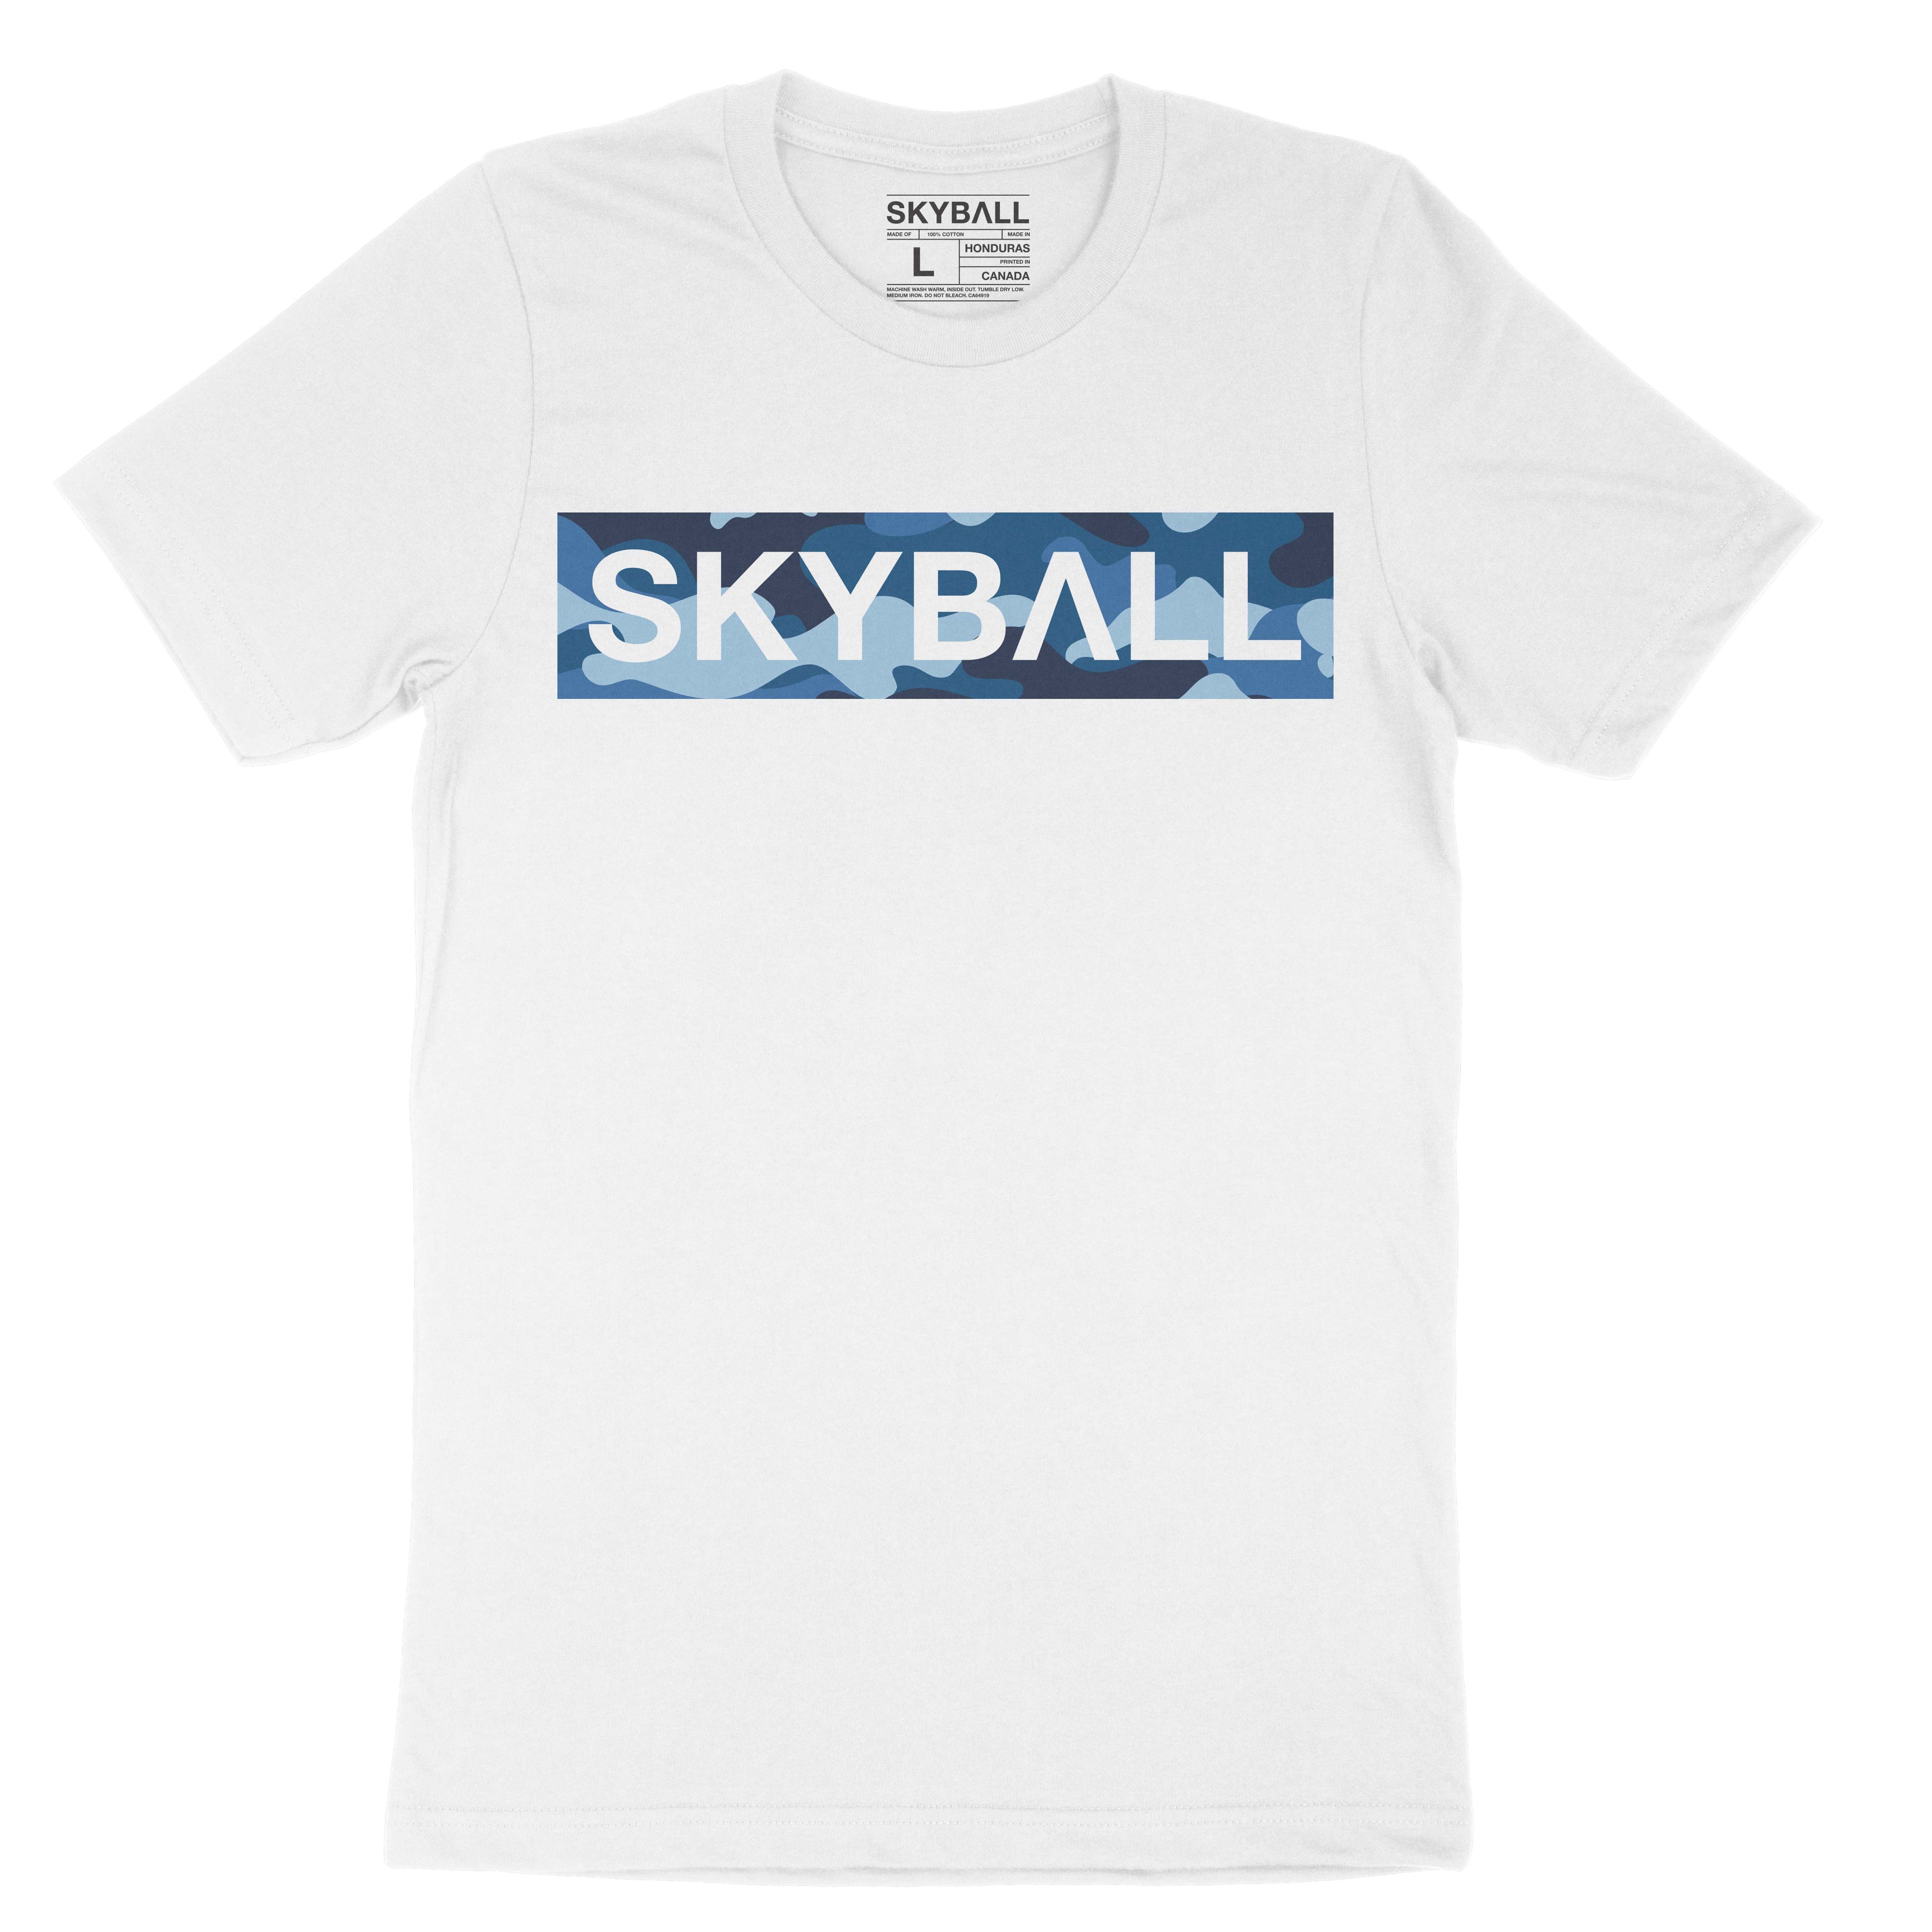 Skyball Beach Volleyball Apparel - Incognito T-Shirt